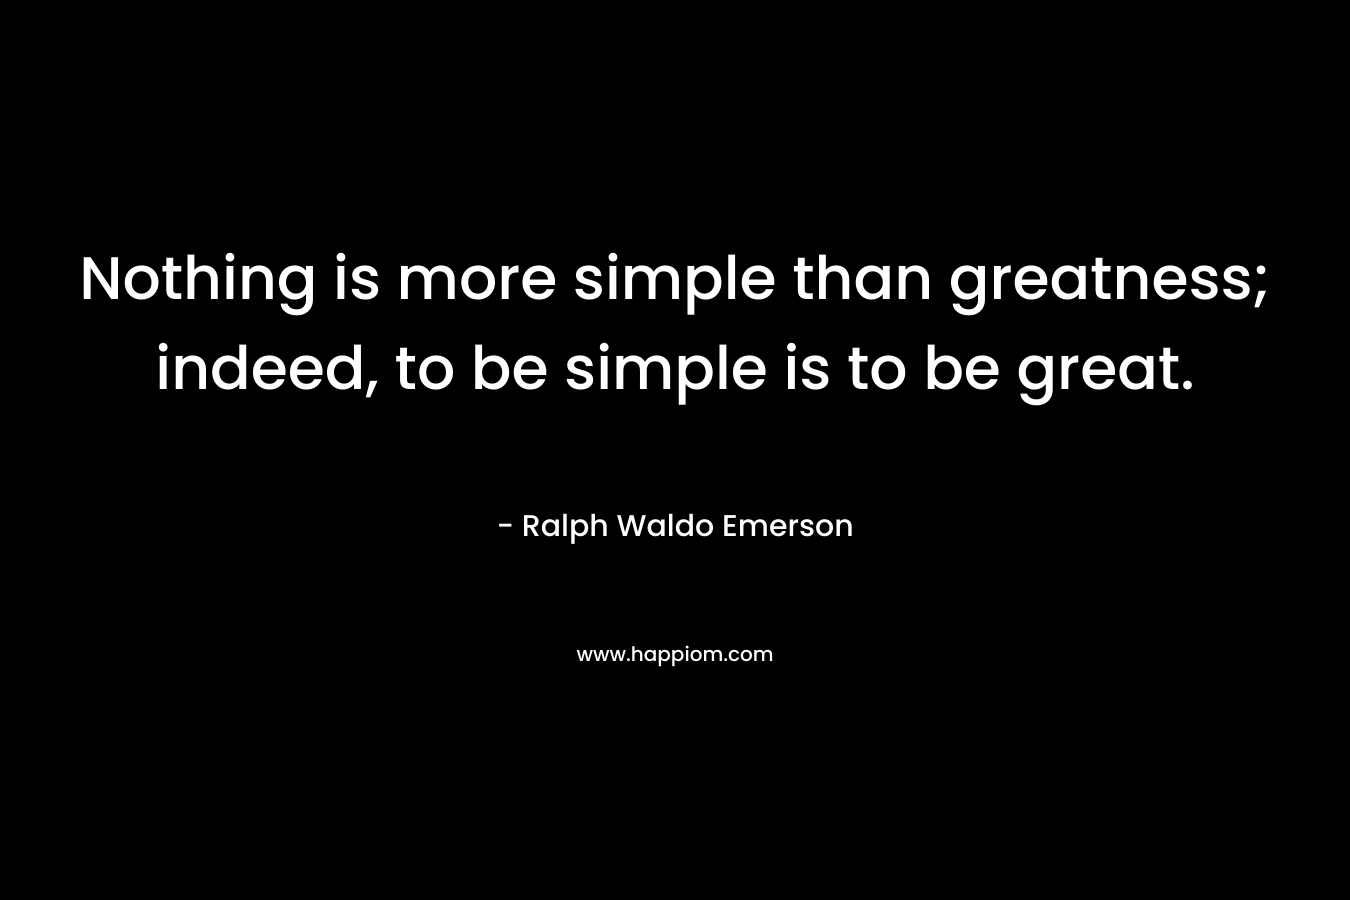 Nothing is more simple than greatness; indeed, to be simple is to be great.